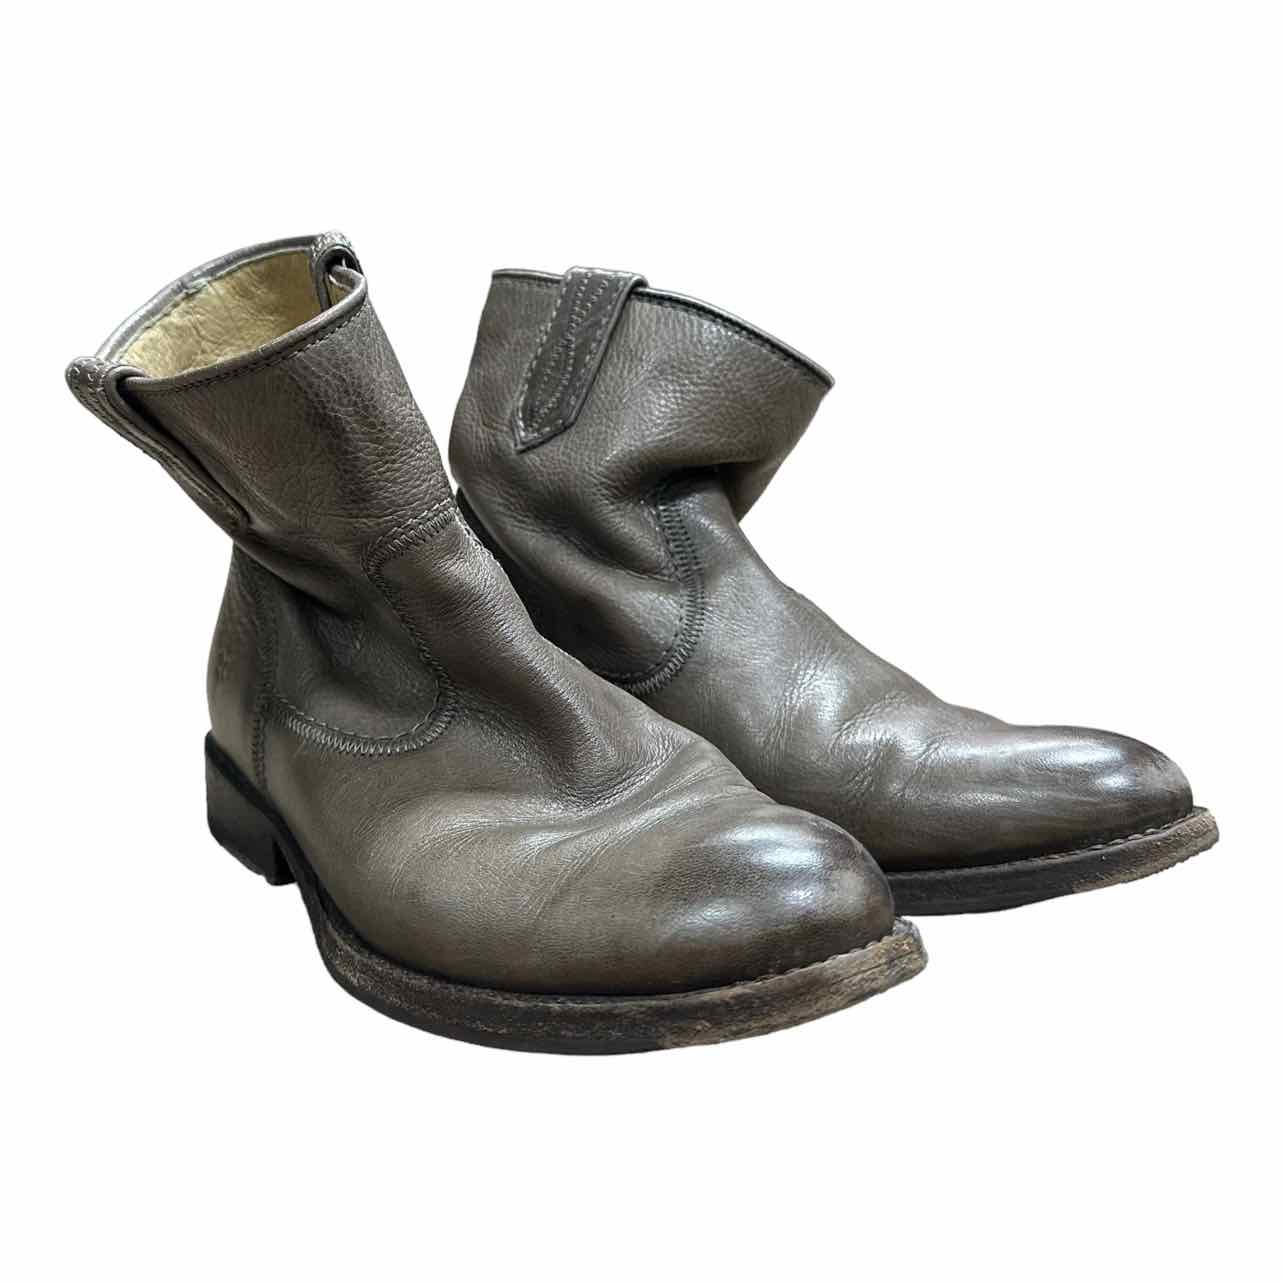 Frye SIZE 6 Ankle Boots